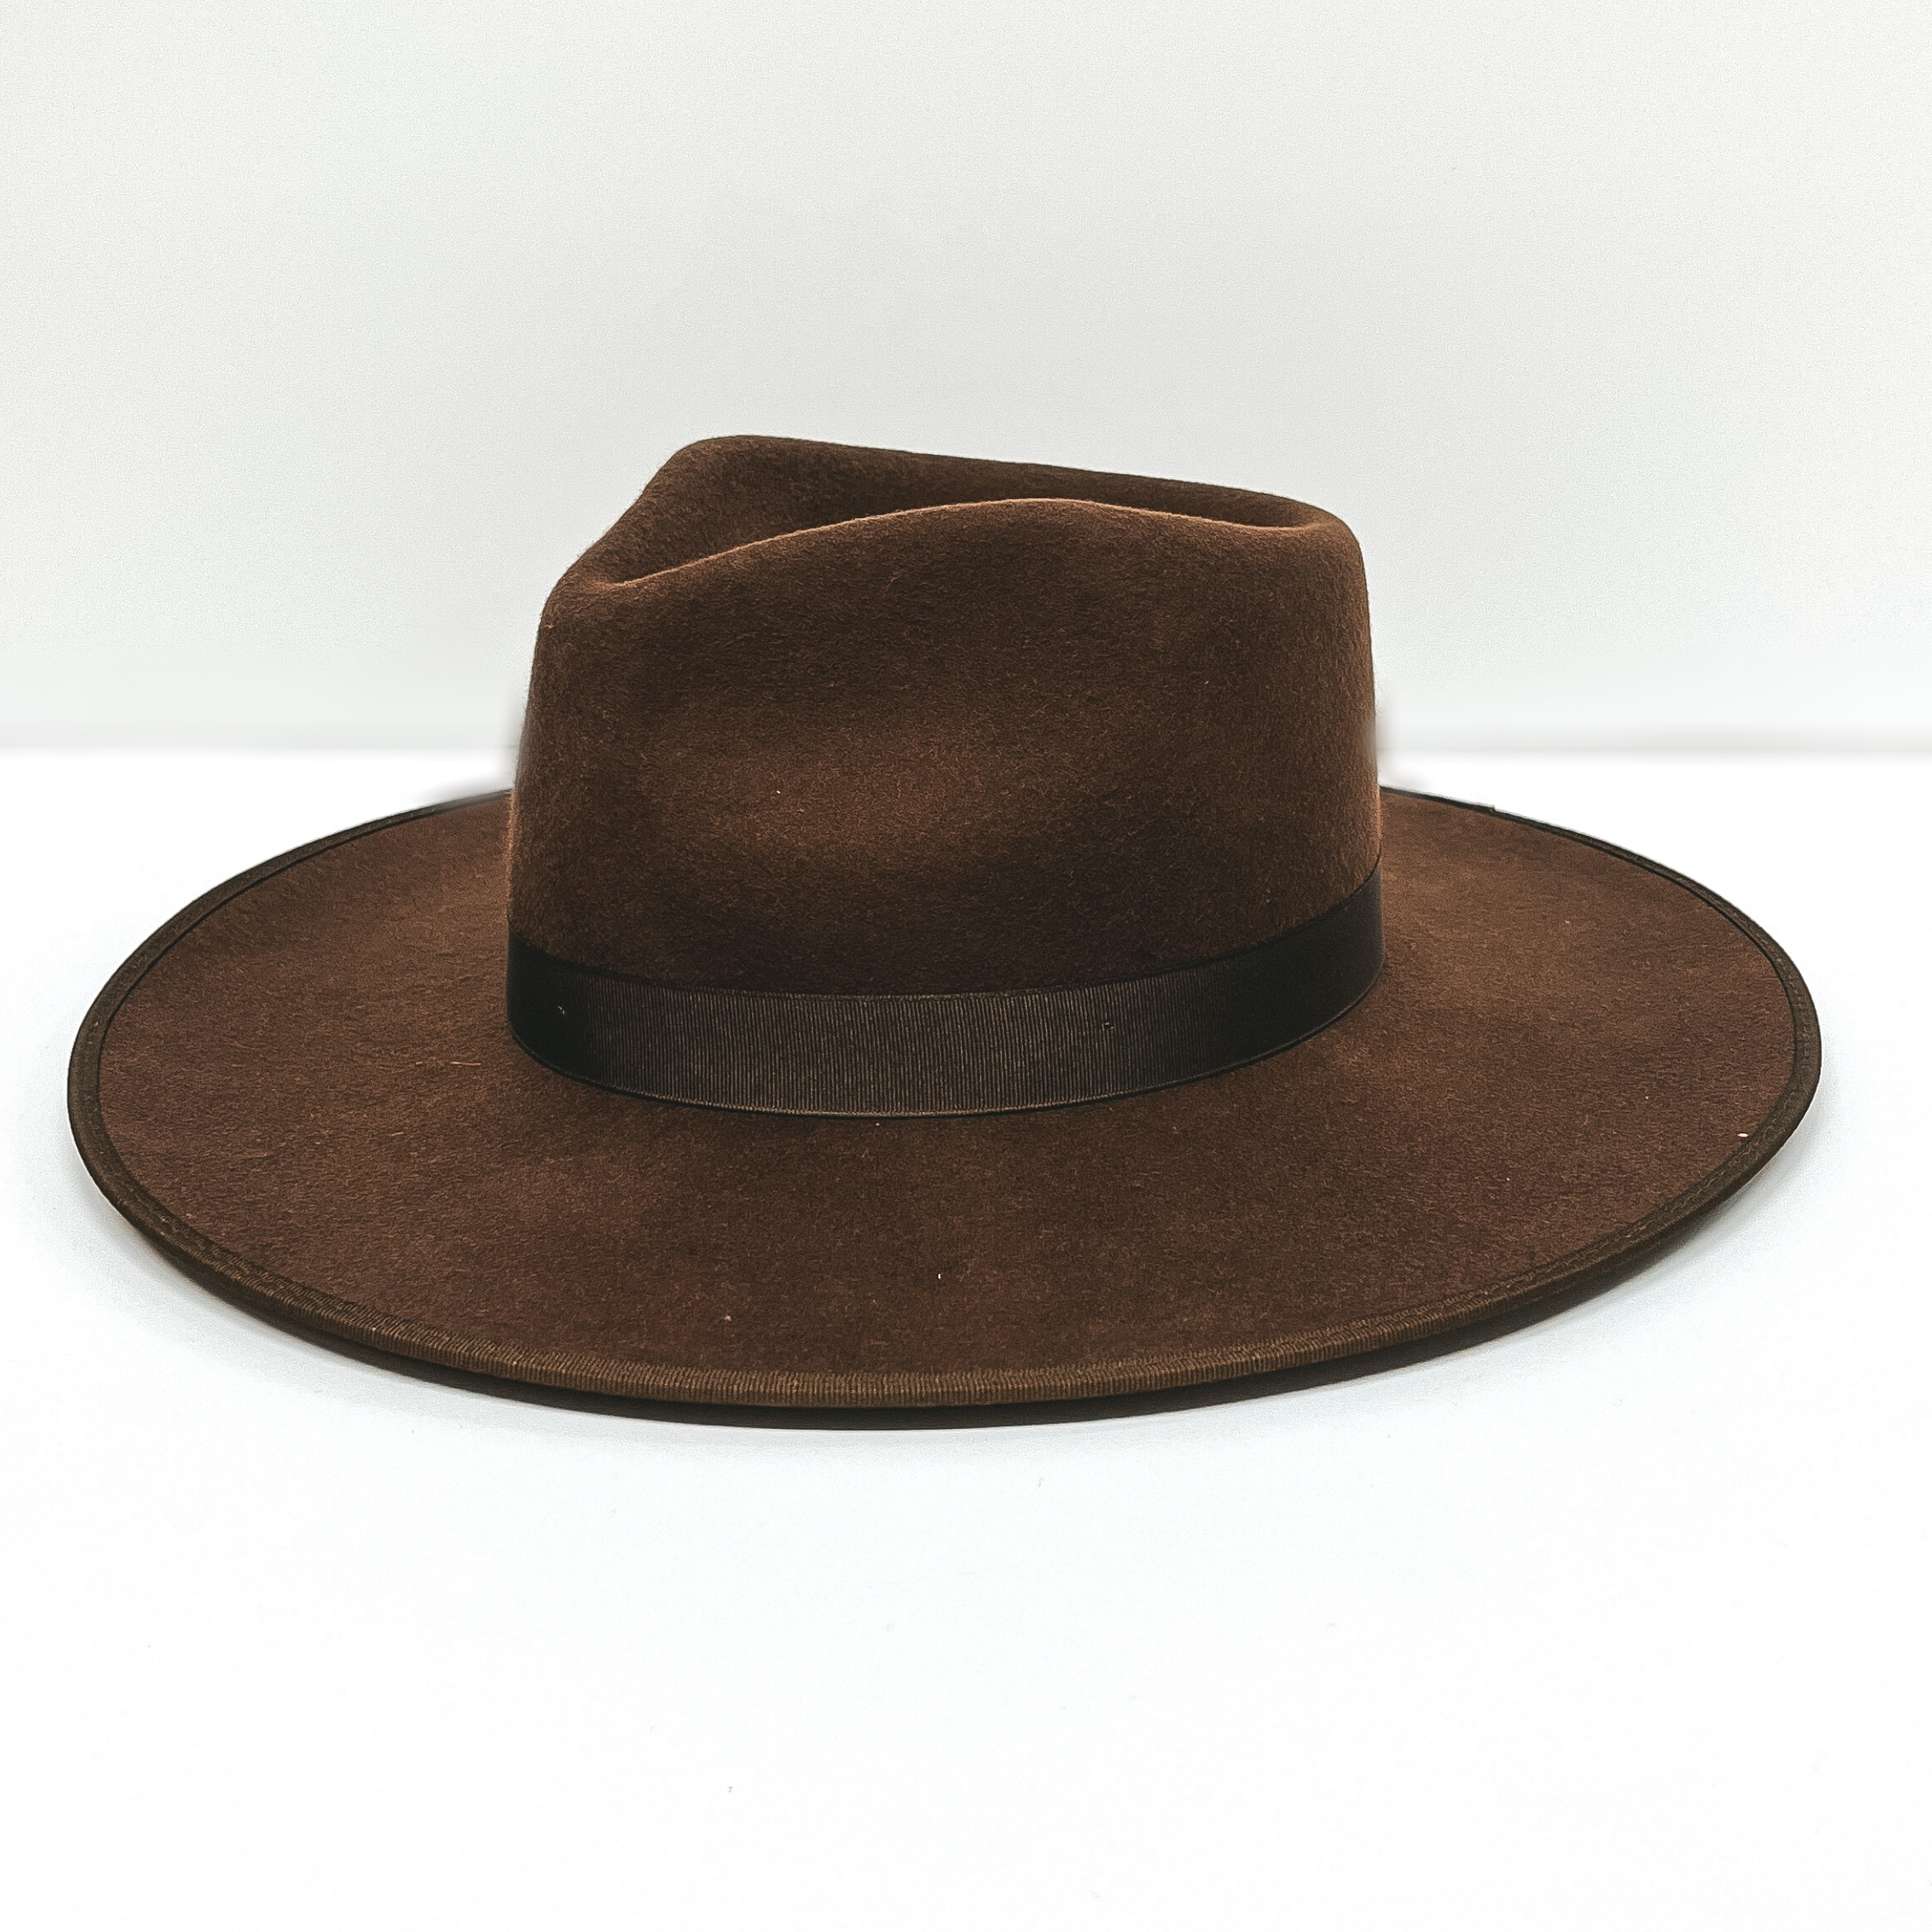 A dark brown felt hat with a ribbon band pictured on a white background.